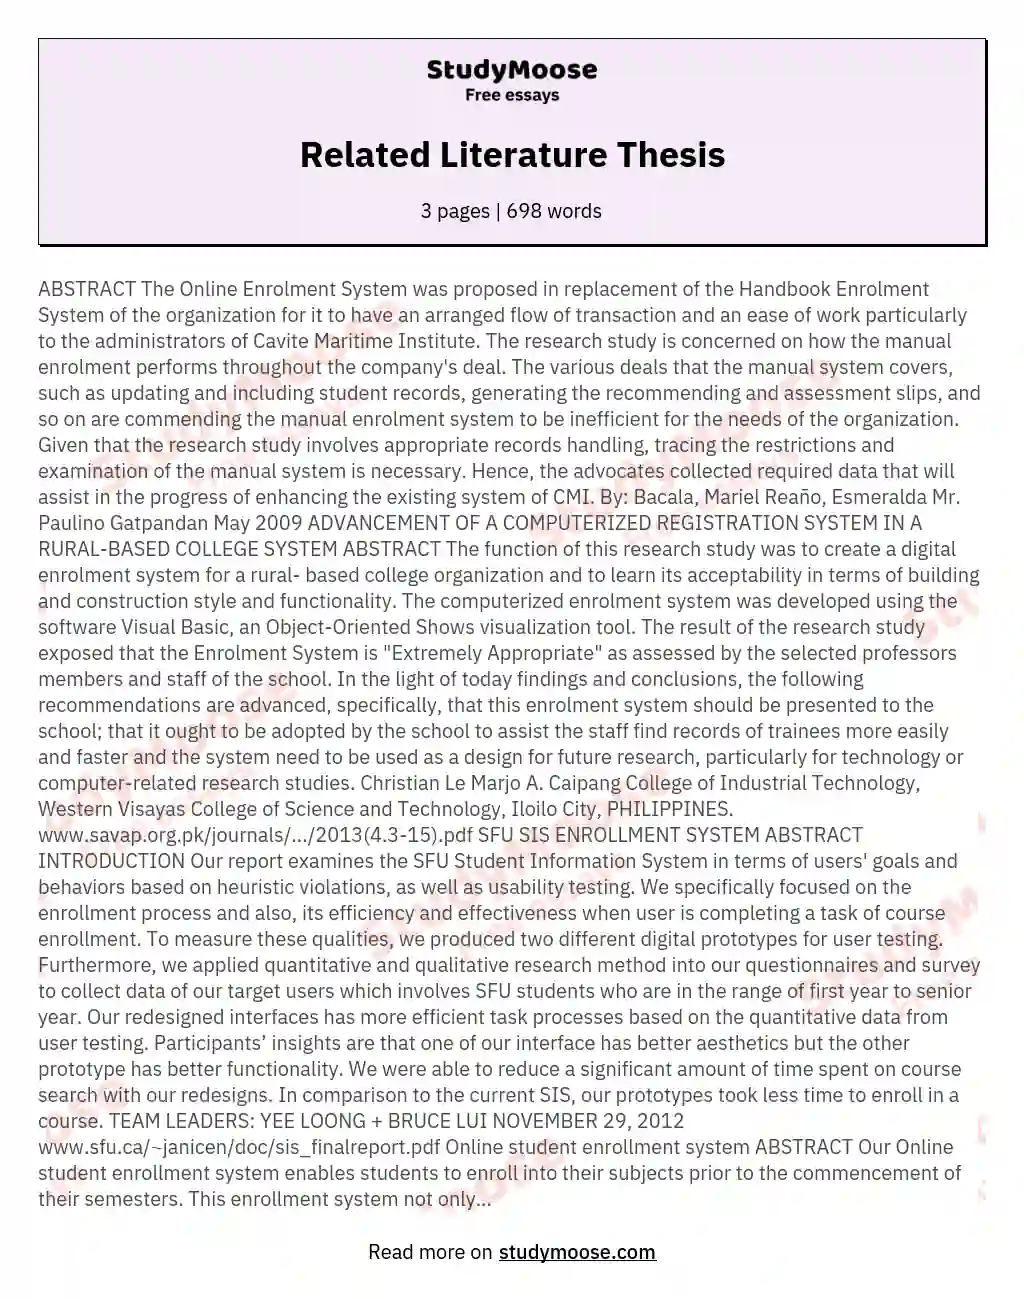 Related Literature Thesis essay